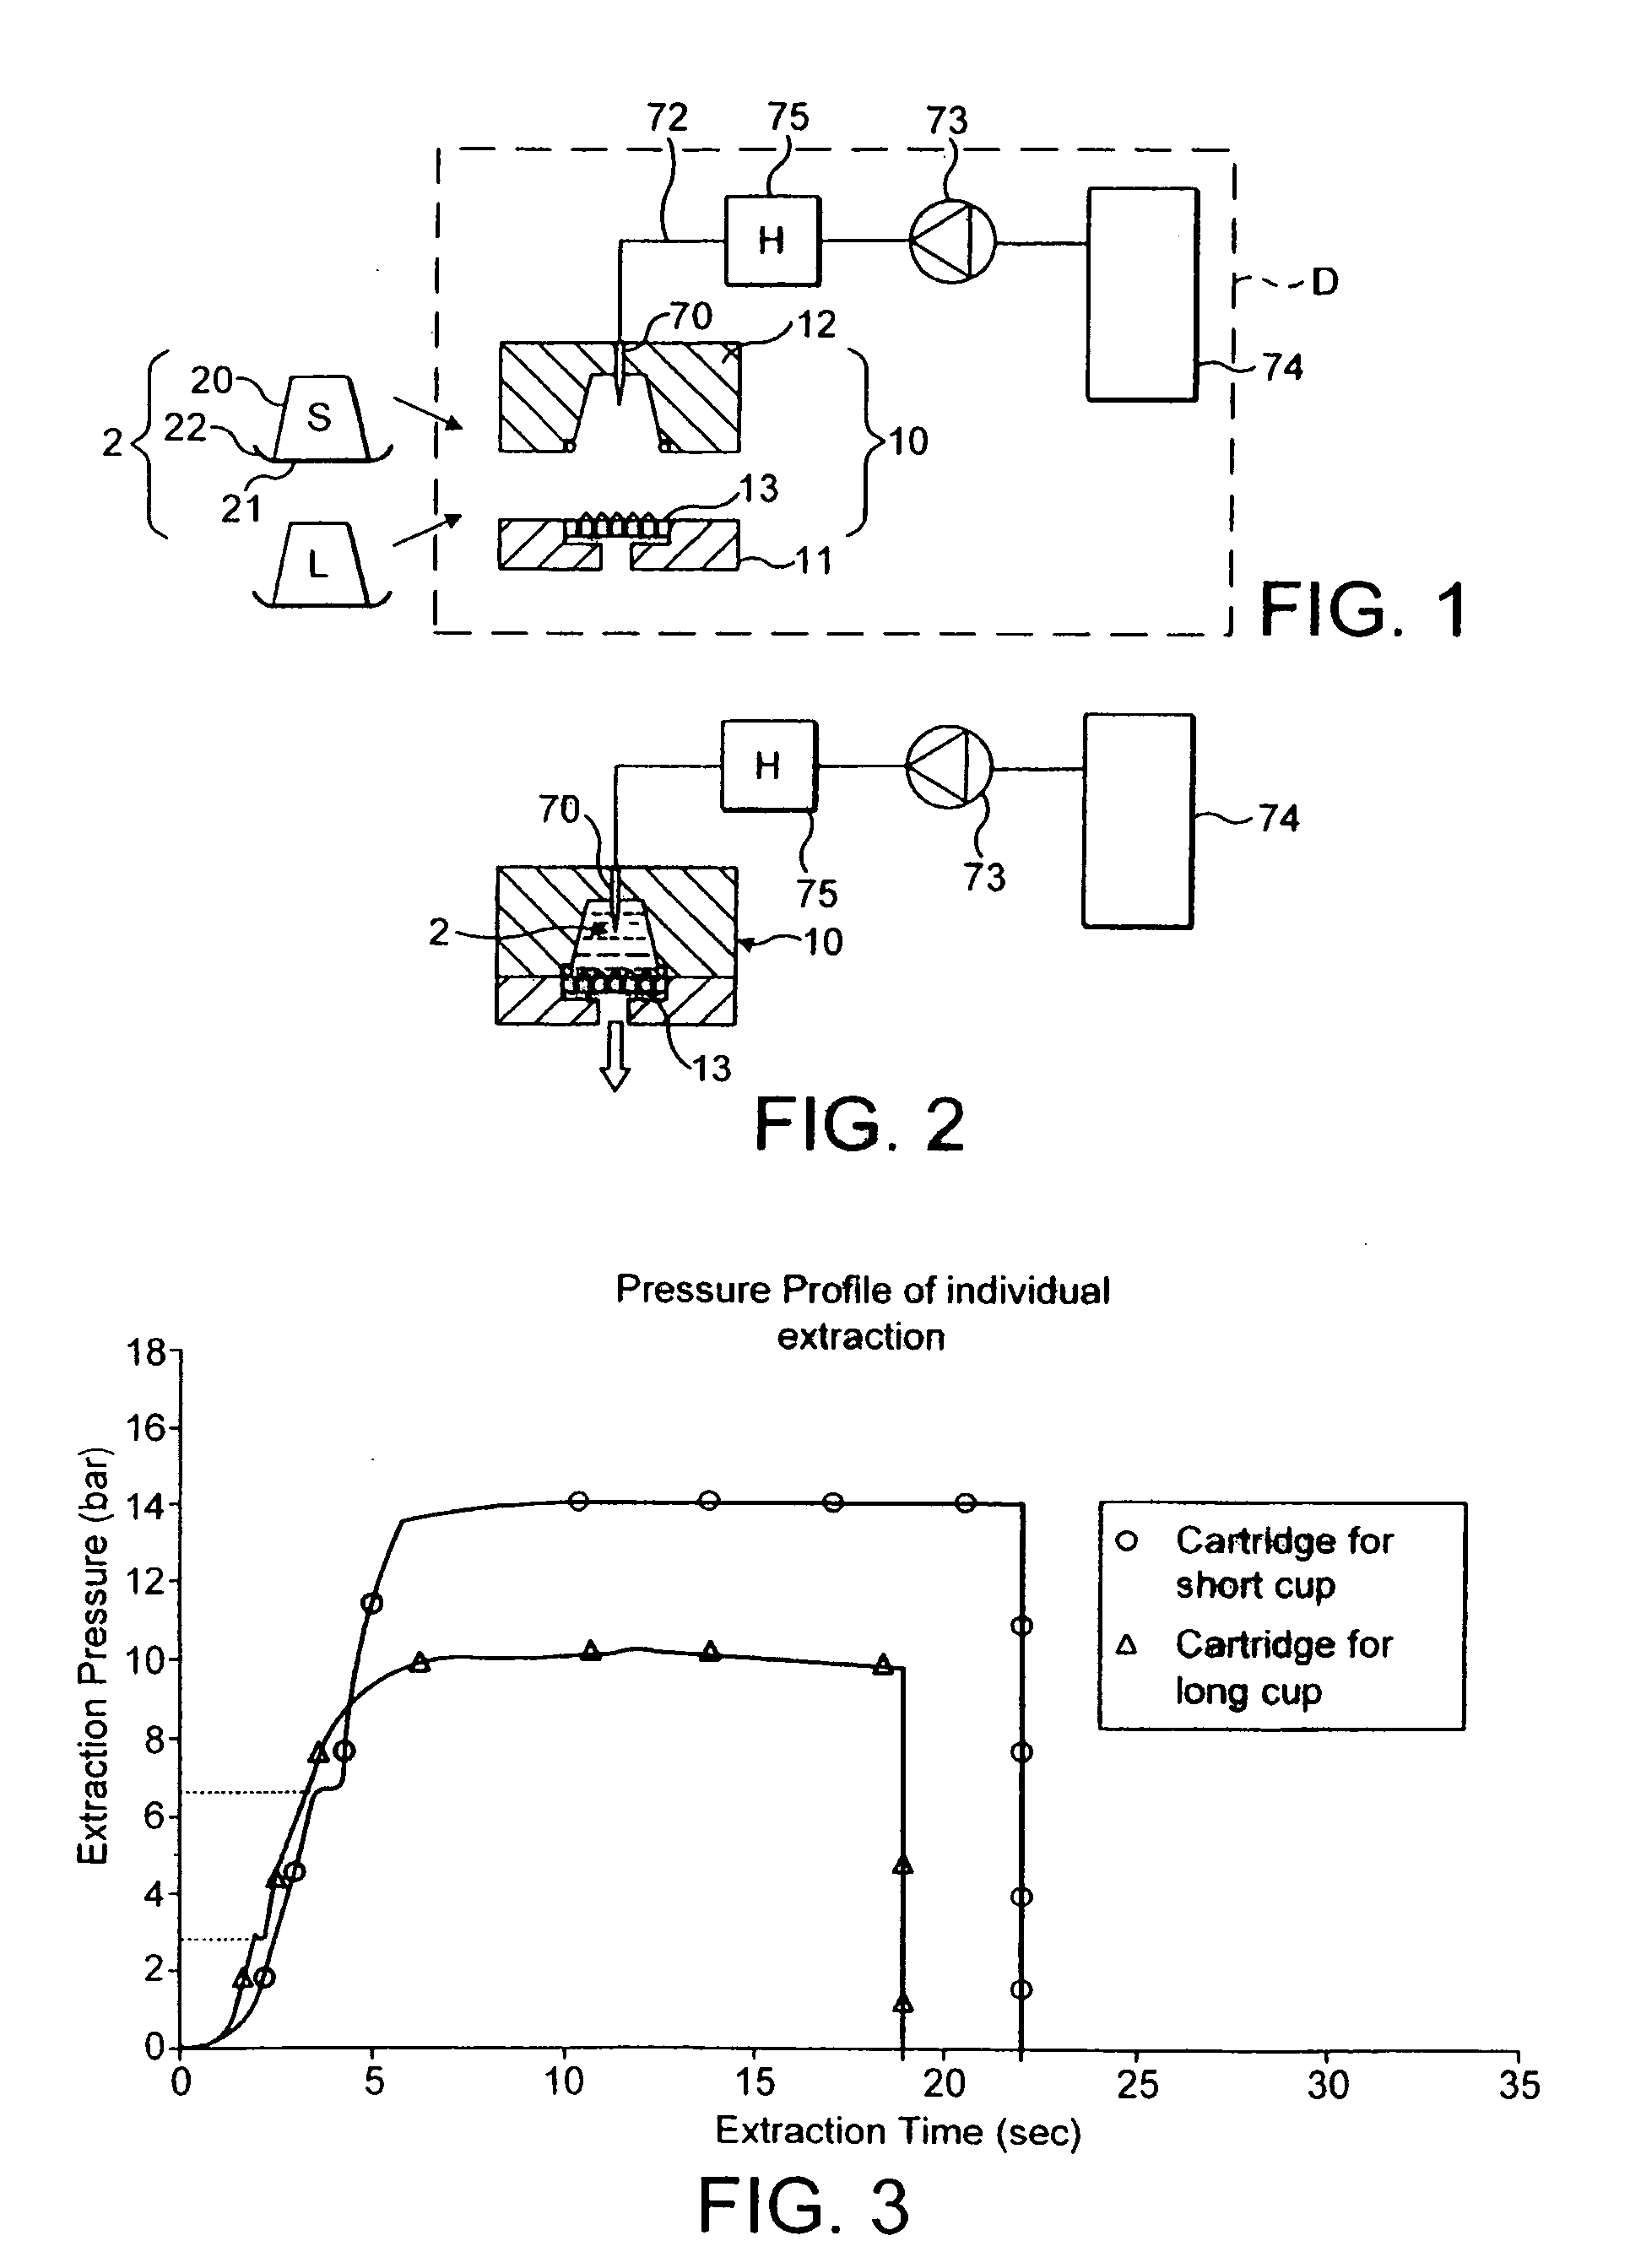 System for dispensing short and long coffee beverages